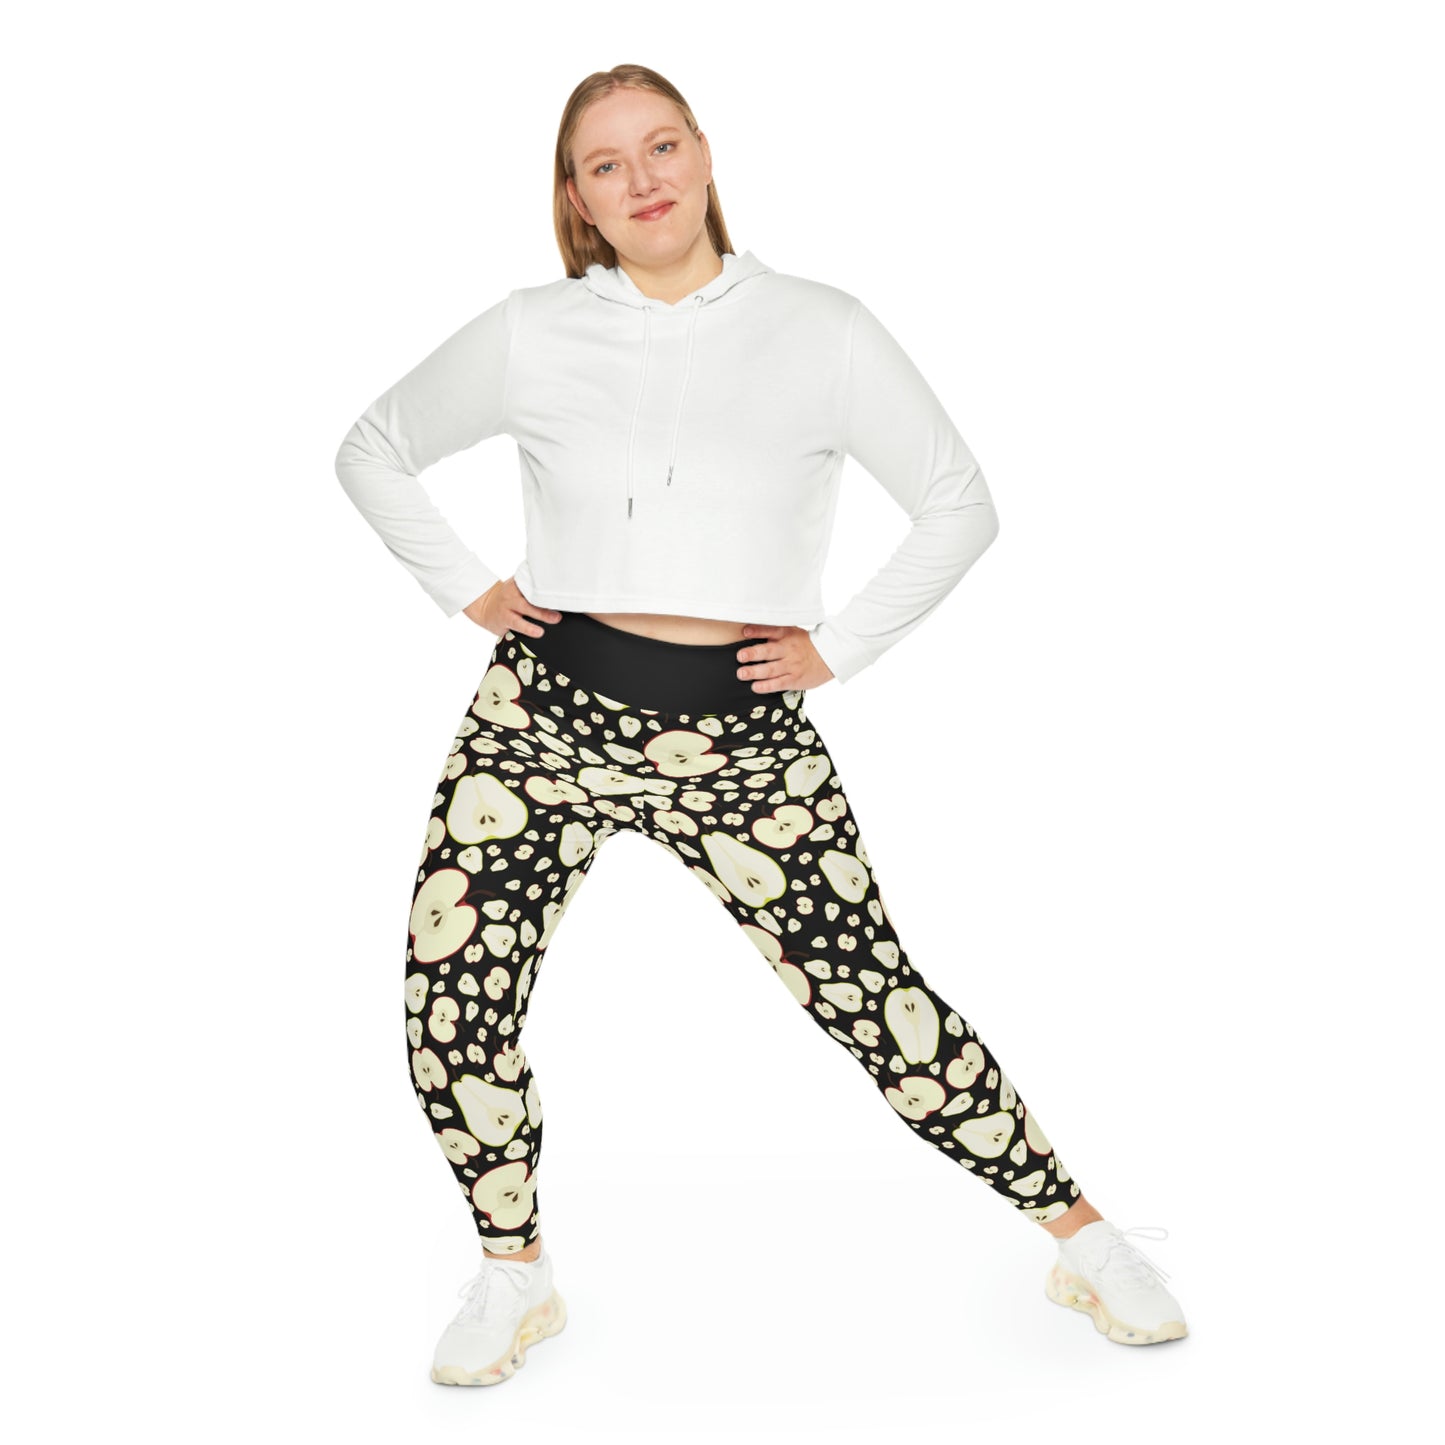 Apples Plus Size Leggings One of a Kind Gift - Unique Workout Activewear tights for Mom fitness, Mothers Day, Girlfriend Christmas Gift